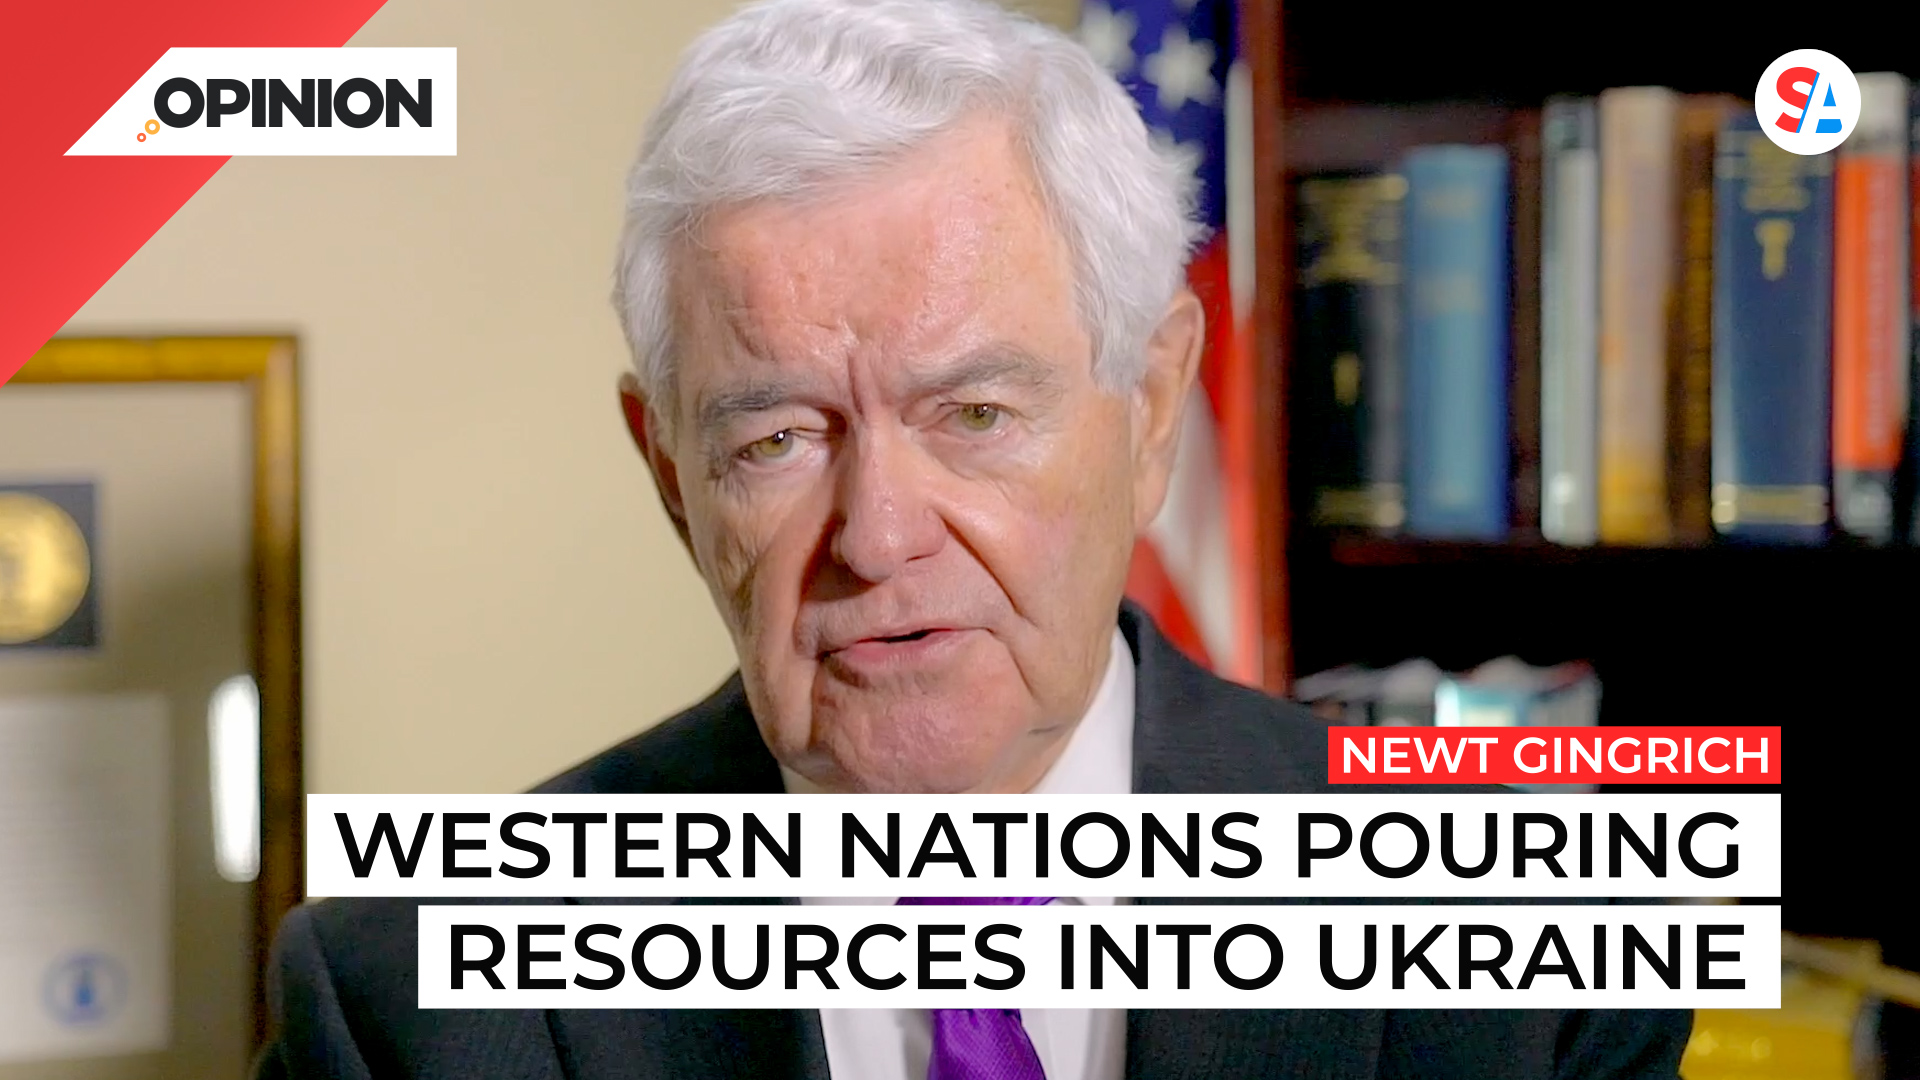 Newt Gingrich says Ukraine War is moving in the right direction.